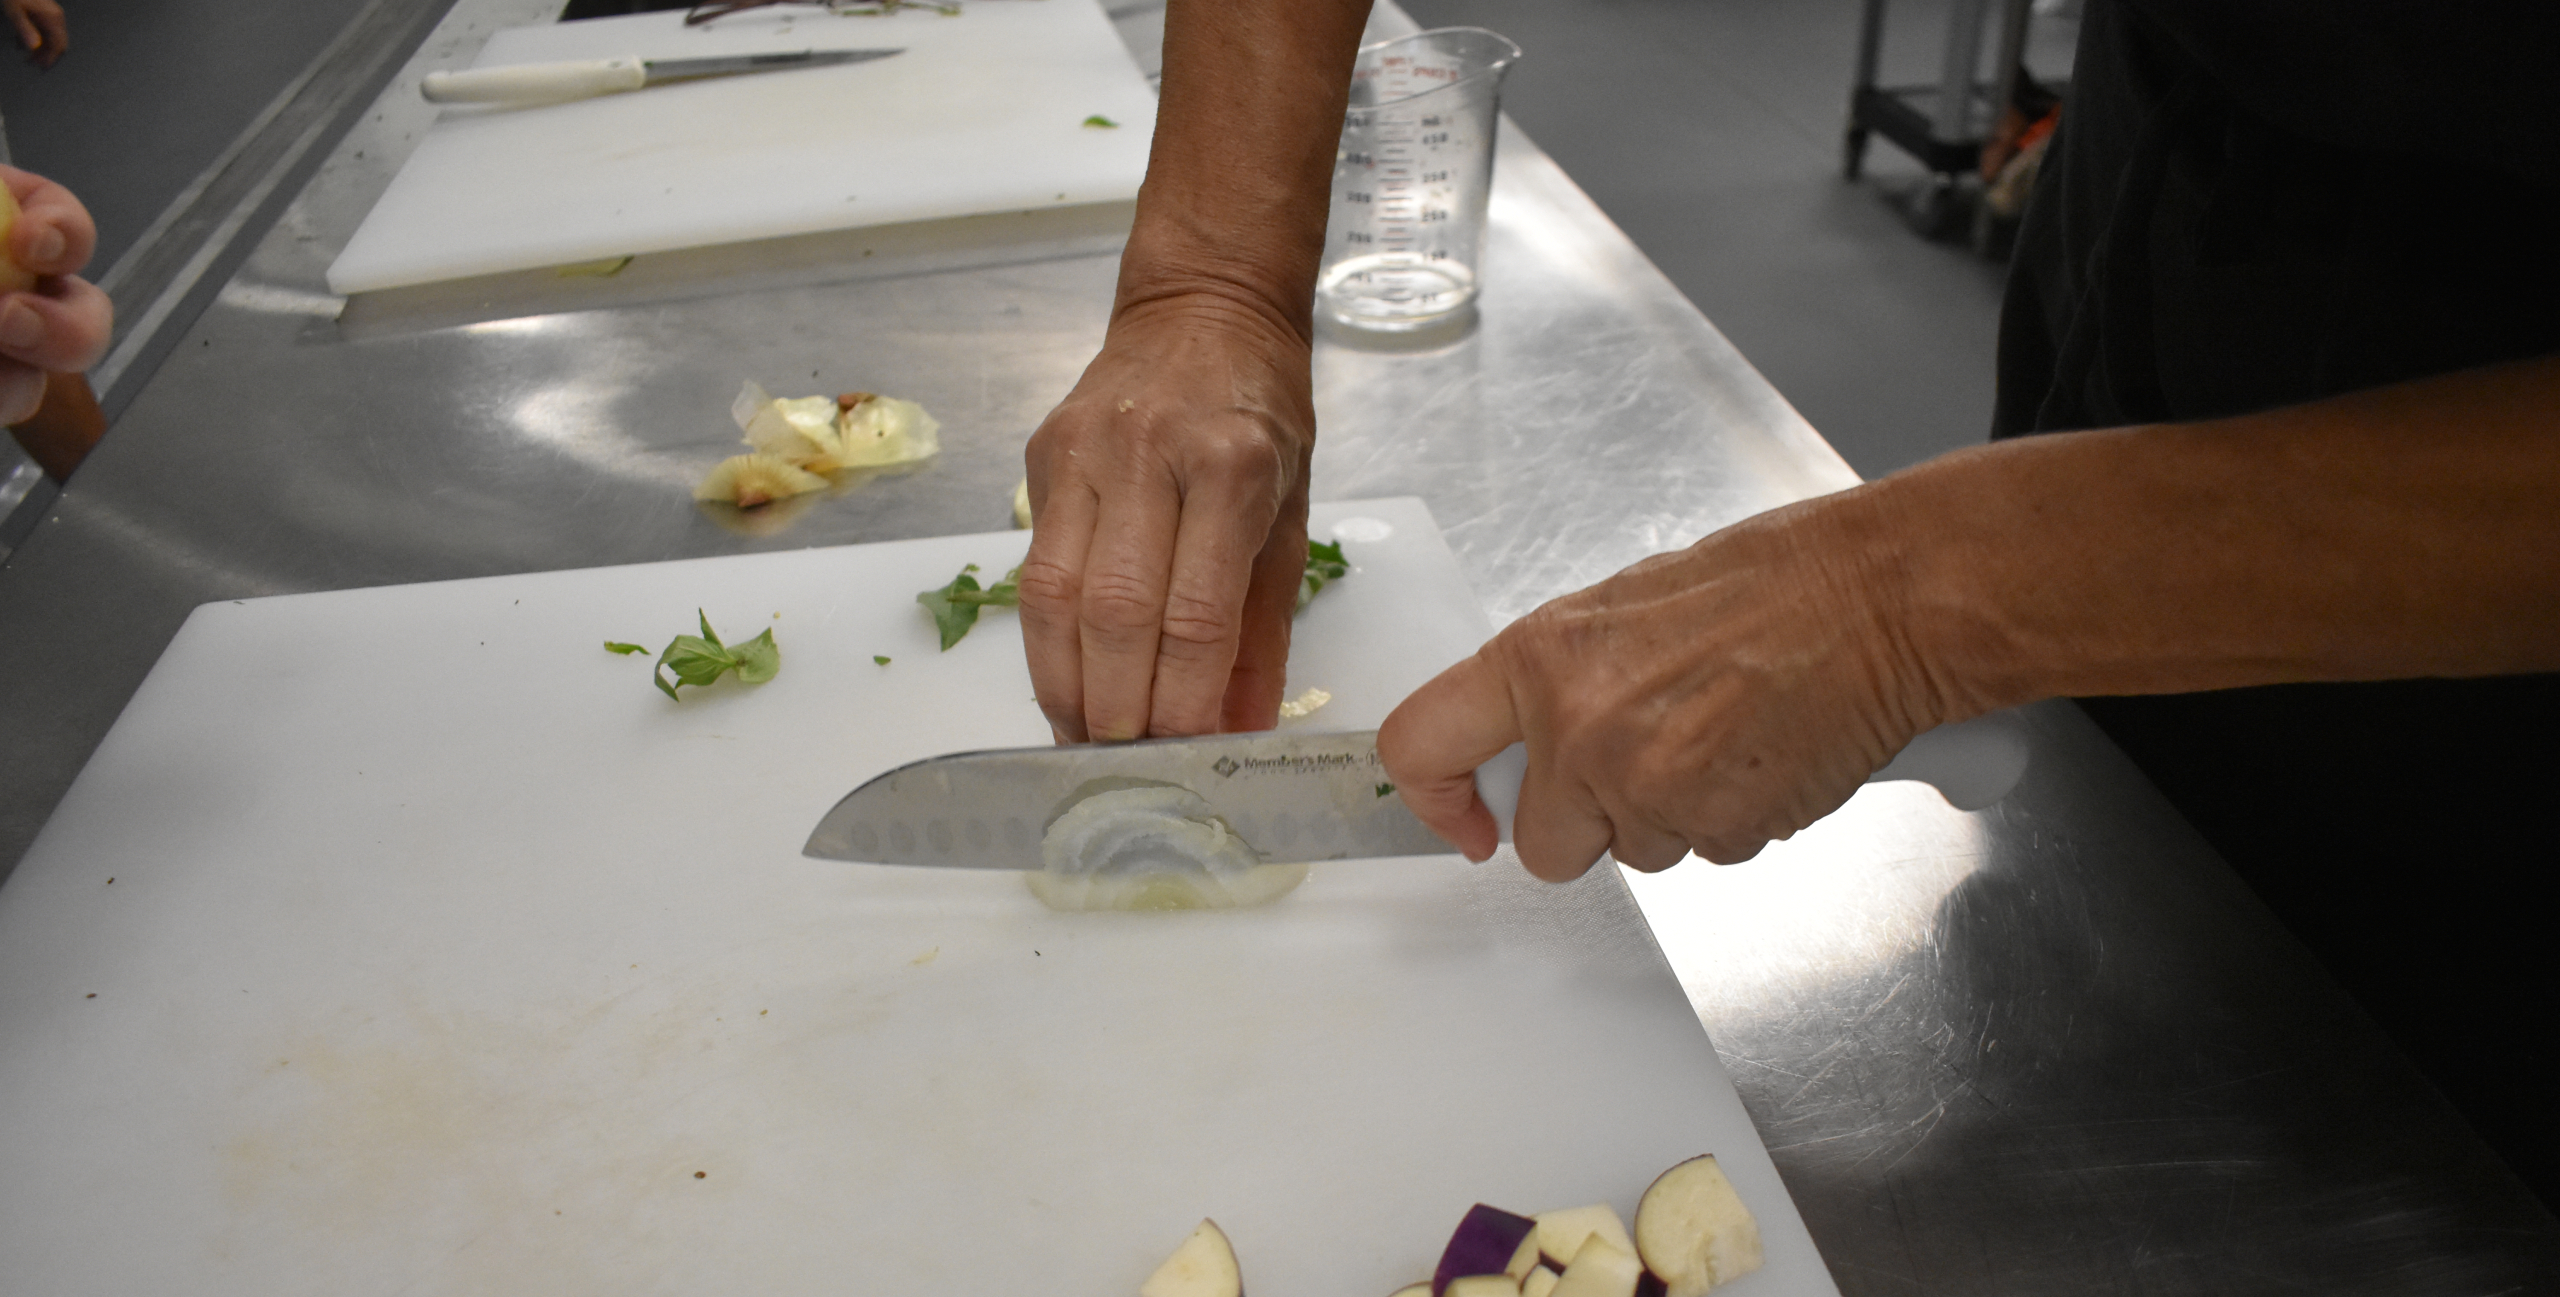 Knife Skills on an Onion at Feeding South Florida Cooking Classes